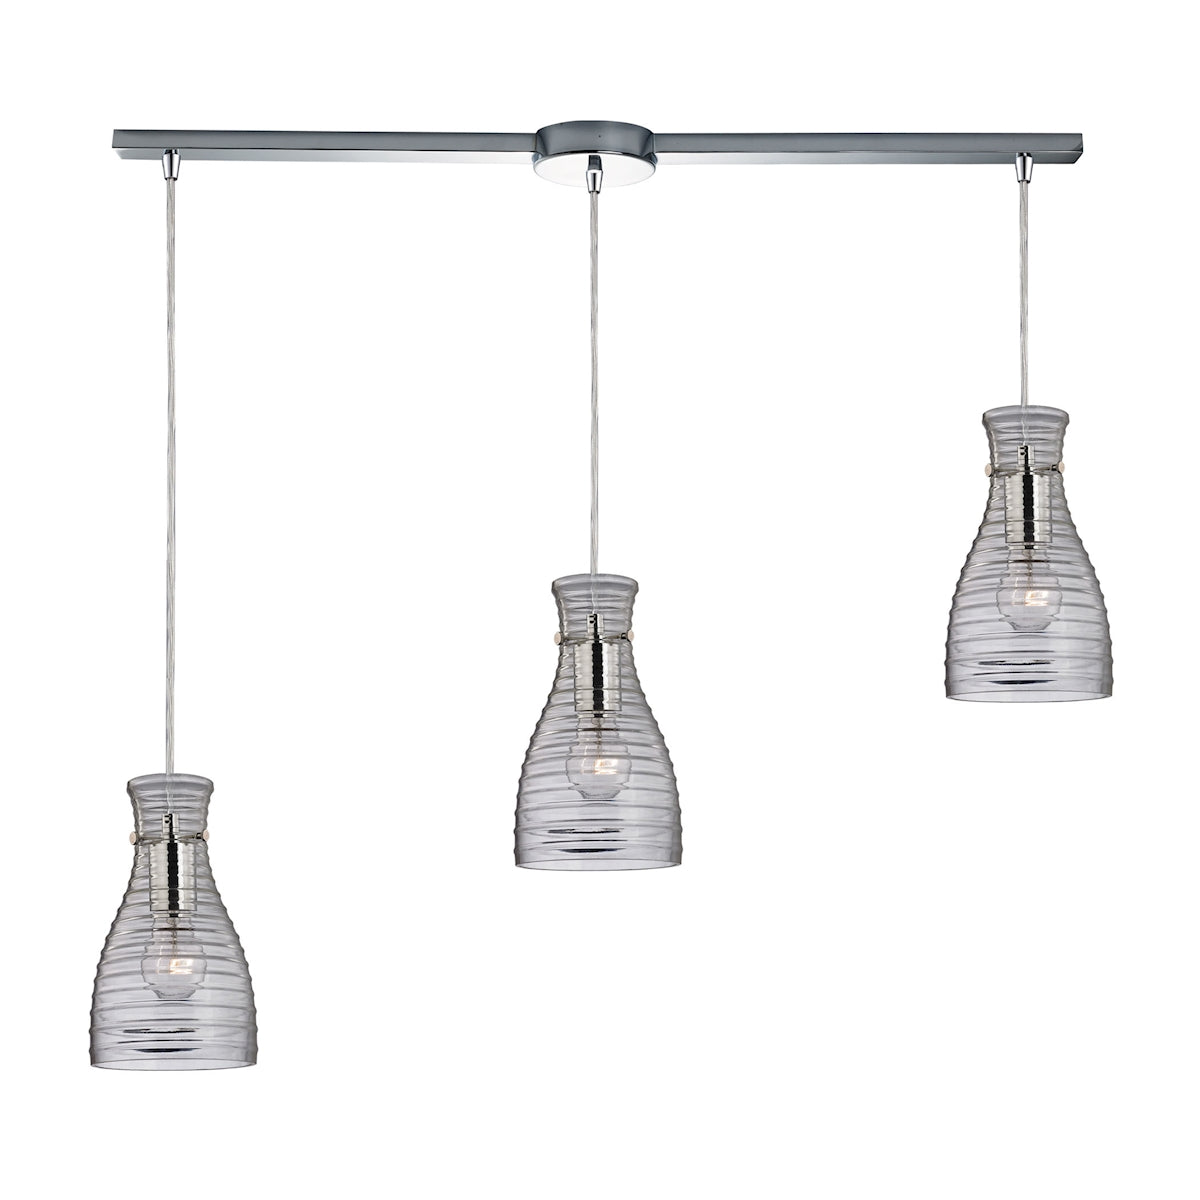 ELK Lighting 46107/3L Strata 3-Light Linear Pendant Fixture in Polished Chrome with Ribbed Blown Glass